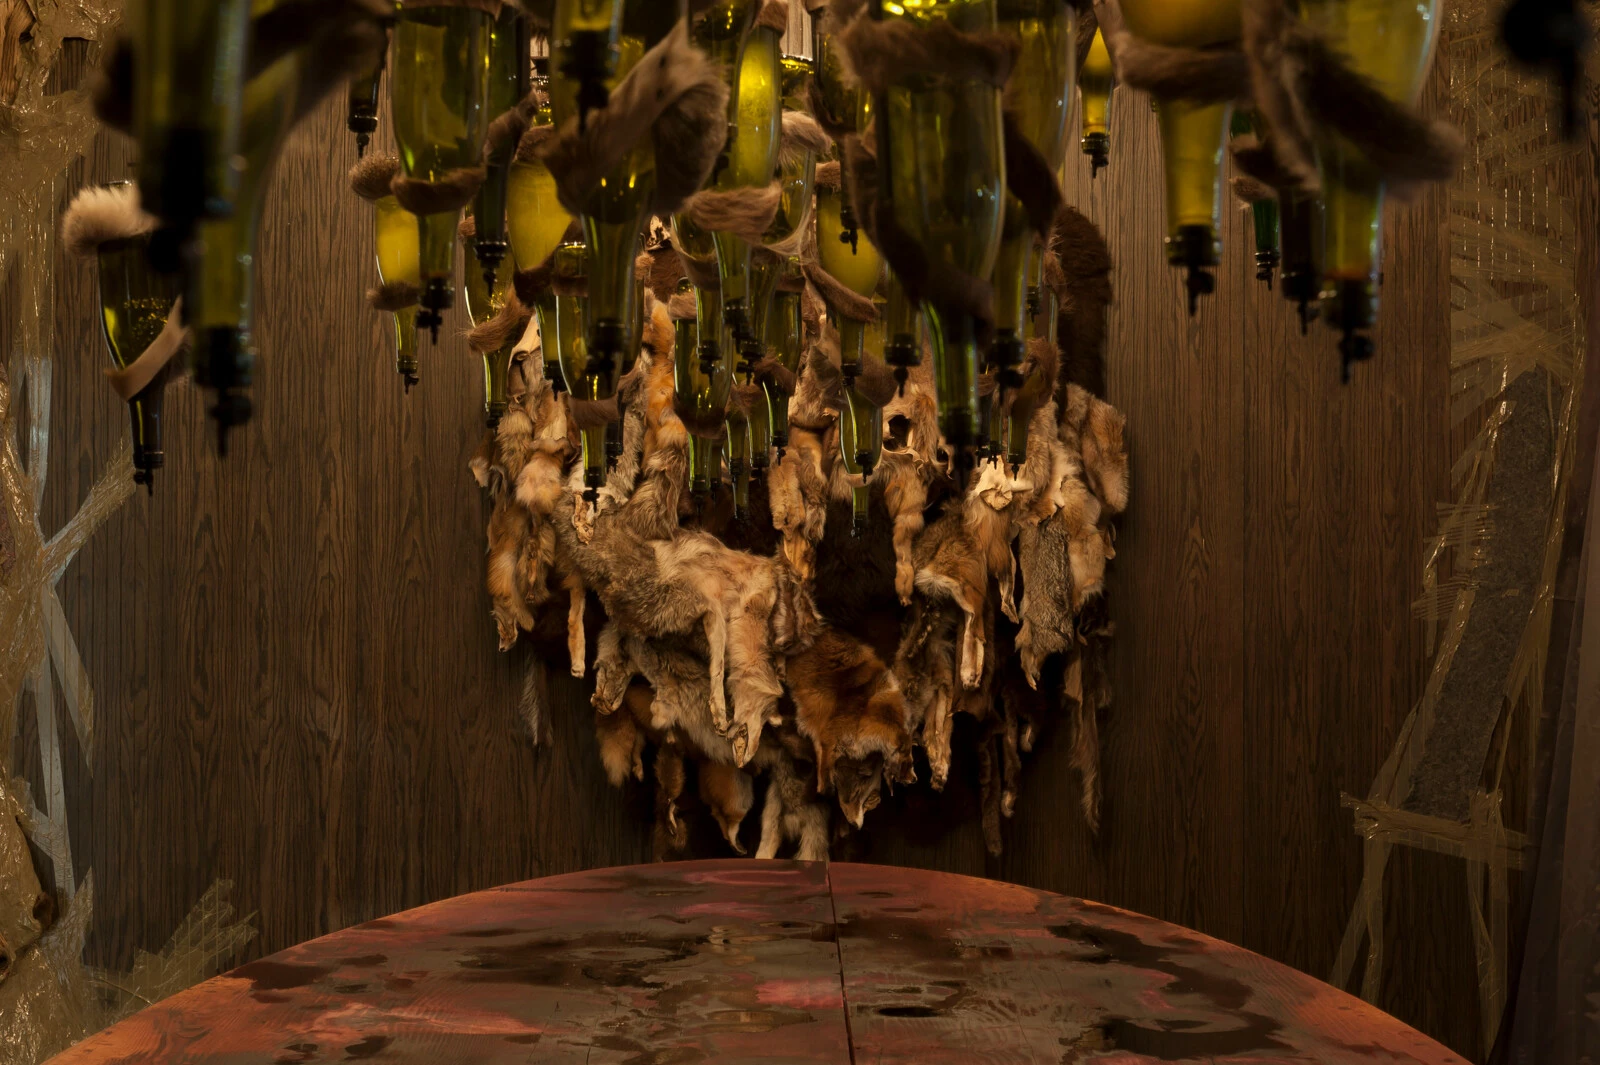 A wood-clad room filled with hanging animal pelts and corked wine bottles over a table.